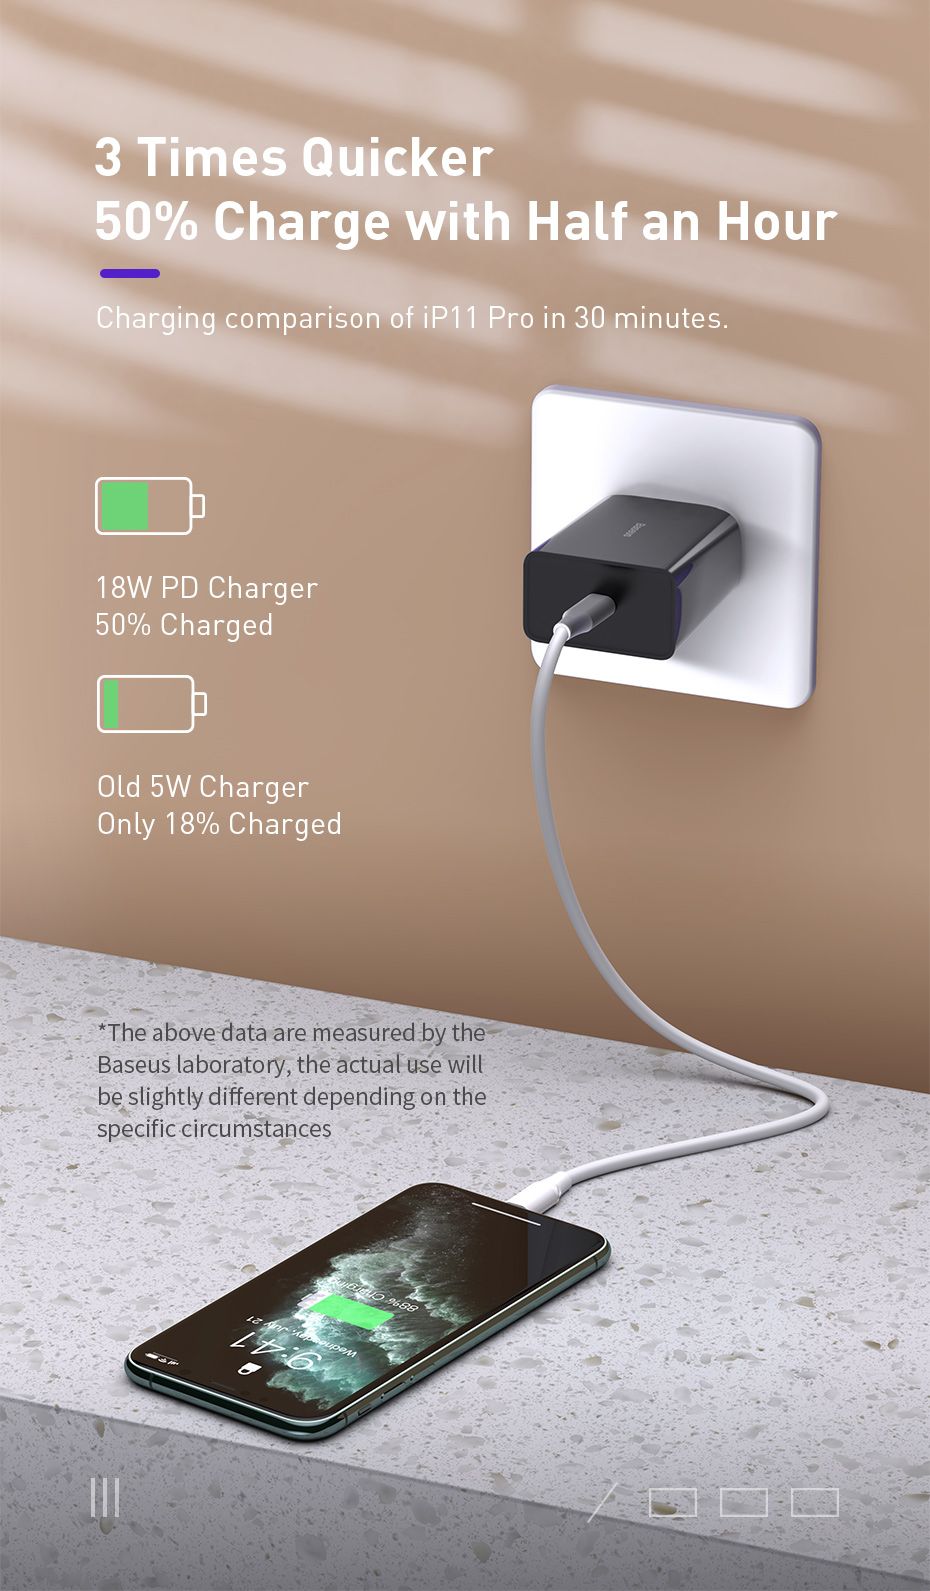 Baseus-TC-012-3A-18W-QC30-Smart-Dual-USB-Quick-Charge-Wall-Charger-for-Samsung-S10-Note8-HUAWEI-Mate-1614183